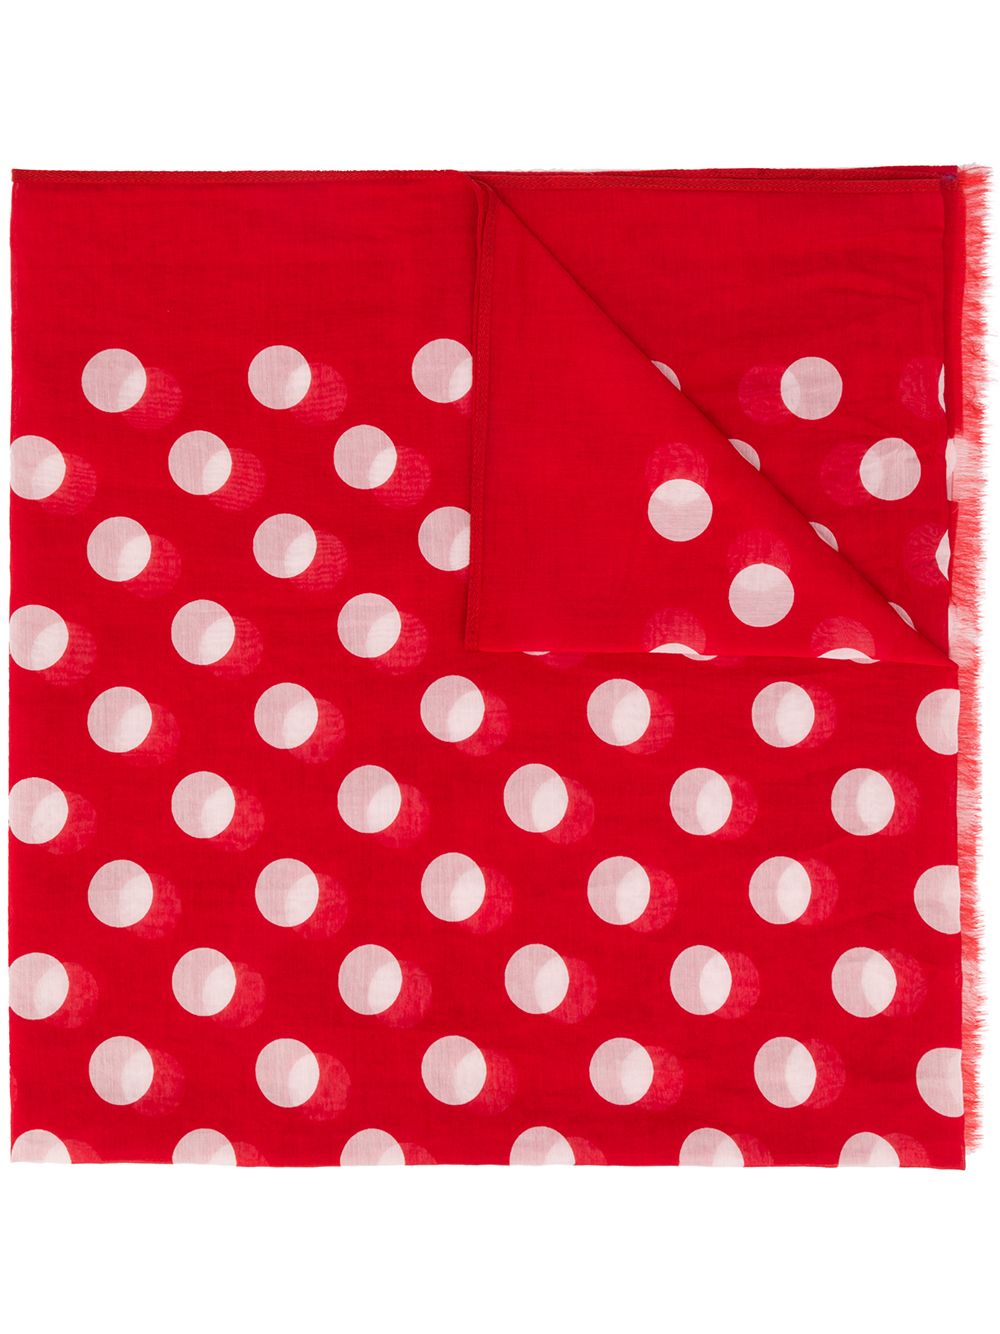 Altea Mocador Dotted Scarf In Red